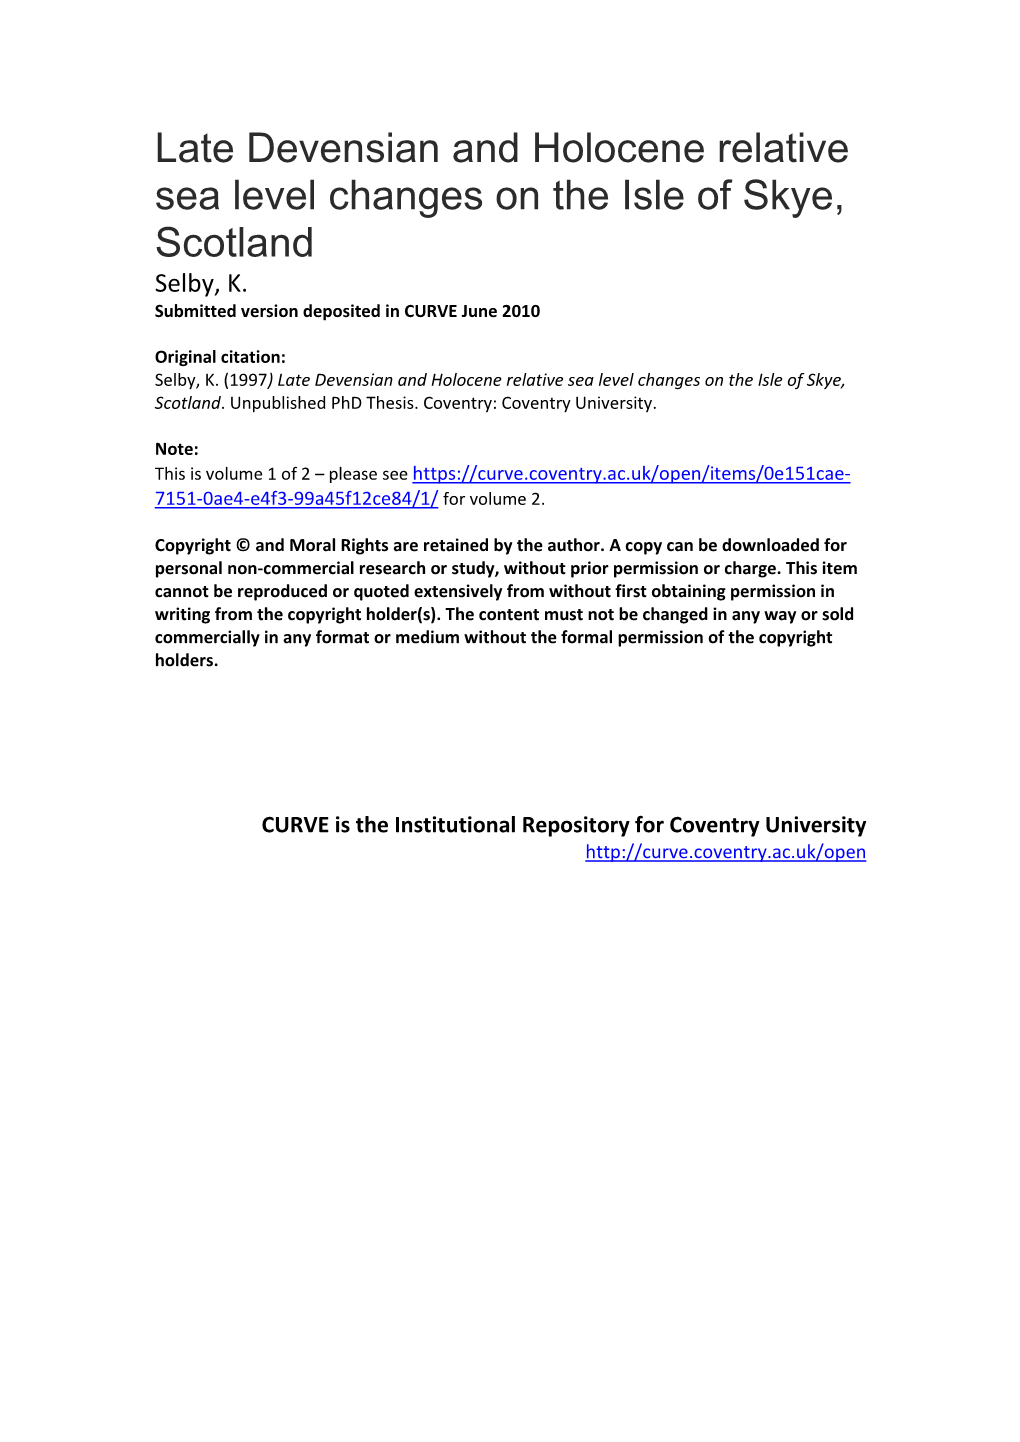 Late Devensian and Holocene Relative Sea Level Changes on the Isle of Skye, Scotland Selby, K